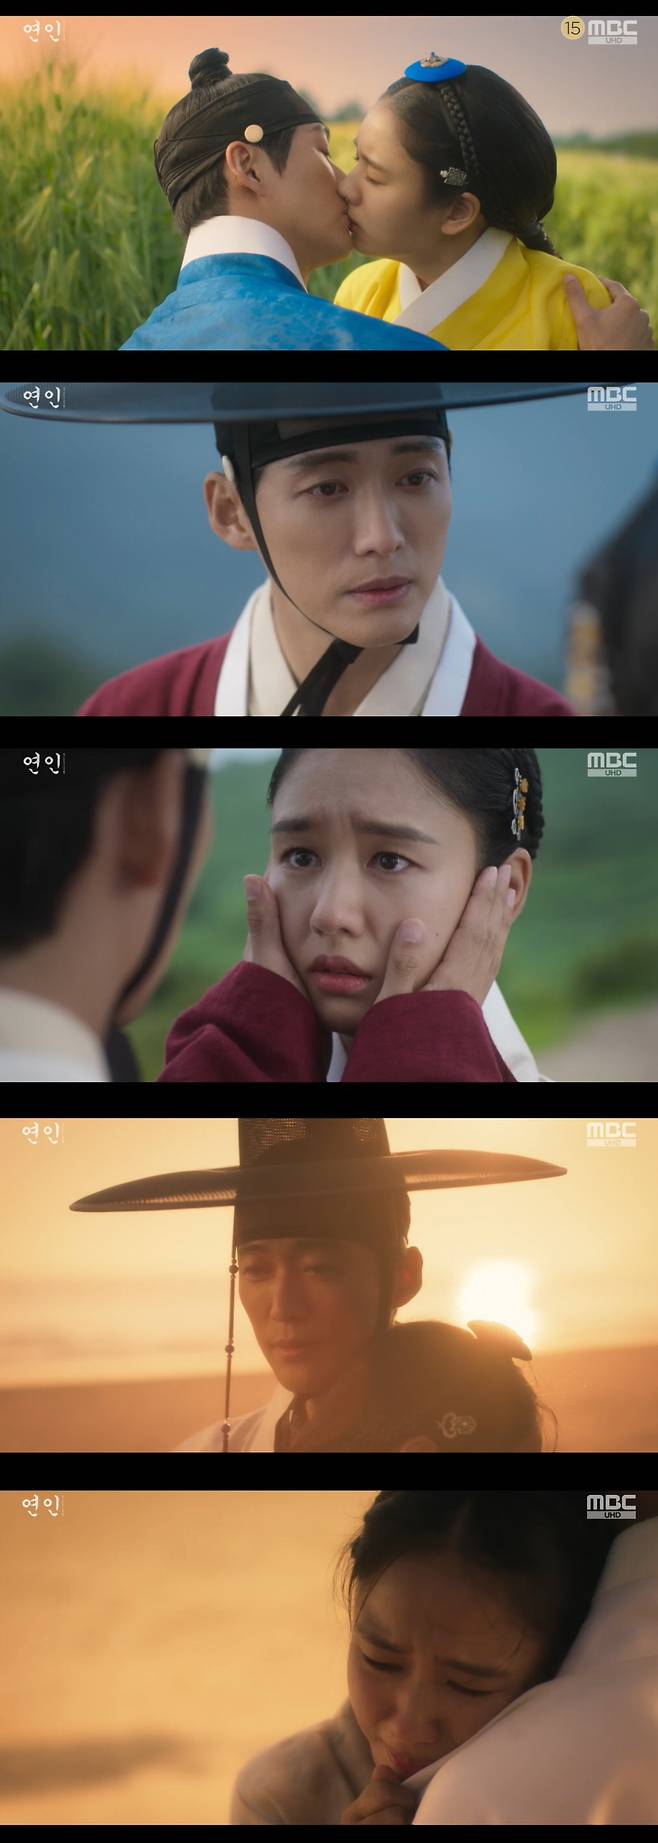 Come back again, revealed Ahn Eun-jin heartily upon hearing that Namgoong Min had died.In the MBC drama Couple, which aired on the 26th, Yizhang County (Namgoong Min), who left for Shenyang, failed to return.Yizhang County decided to leave for Qing Dynasty Shenyang with Sohyeonjae (Kim Moojun).Yizhang County, after sharing his first kiss with Ahn Eun-jin, said, I know that your heart is still in the help command of Yeonjun.Do not forget me even if you do not have The Kings Affection. You should never forget this moment with me today.Yizhang County, with the captured Joseon people, packed up and headed for the Qing dynasty, while Yu Gil-chae also pursued Yizhang County.However, Yizhang County rescued Yu Gil - chae from the crisis. Yu Gil - chae was angry at Yizhang County, saying, Can you be so selfish? Yizhang County said, Why are you suddenly doing this?Did you have any interest that I did not have? Yu Gil-chae said, I need new flower shoes right now, so please bring it quickly. Yizhang County said, If I bring flower shoes, what will you give me?The only thing I want is my heart. If you promise not to think about Yeonjun again, I will try to turn the way to Shenyang, Yu Gil-chae refused.Yizhang County said that Yu Gil-chae came to see Jasin off with flower shoes as an excuse.After a while, Yu Gil-chae waited for Yizhang County with excitement when he heard that Yizhang County might return from Shenyang, but Yizhang County was nowhere to be seen.Yizhang County was imprisoned at that time for insulting Jeong Myeong-su (played by Kang Gil-woo).Yu Gil-chae went to Yizhang County and heard that Yizhang County had lost his life.When Yu Gil-chae heard that there are relics of the dead in Shenyang at the coffin, he immediately went to check the relics.Yu Gil-chae hugged Yizhang Countys clothes and said, Come back. I will not be buried again when I come back.There is still something I can not say. 